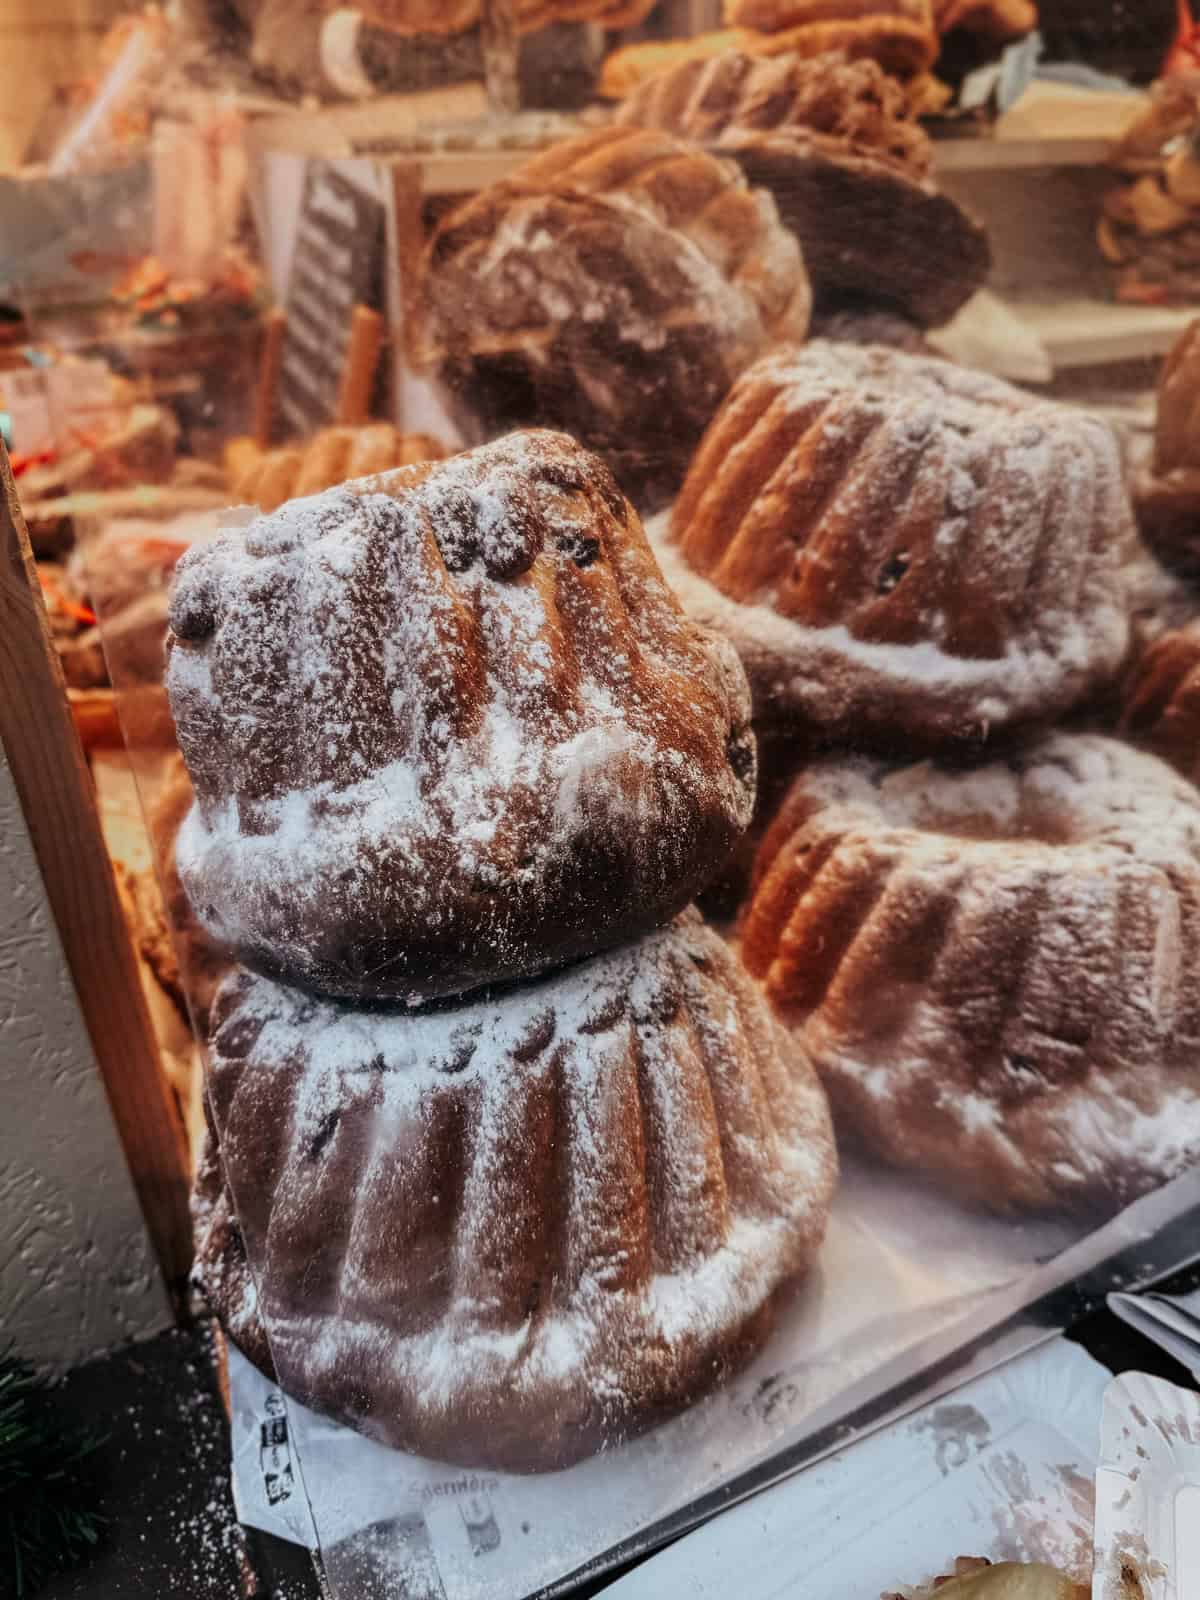 Several Alsatian Kouglofs dusted with powdered sugar stacked at a market, showcasing their distinctive circular, ridged shape